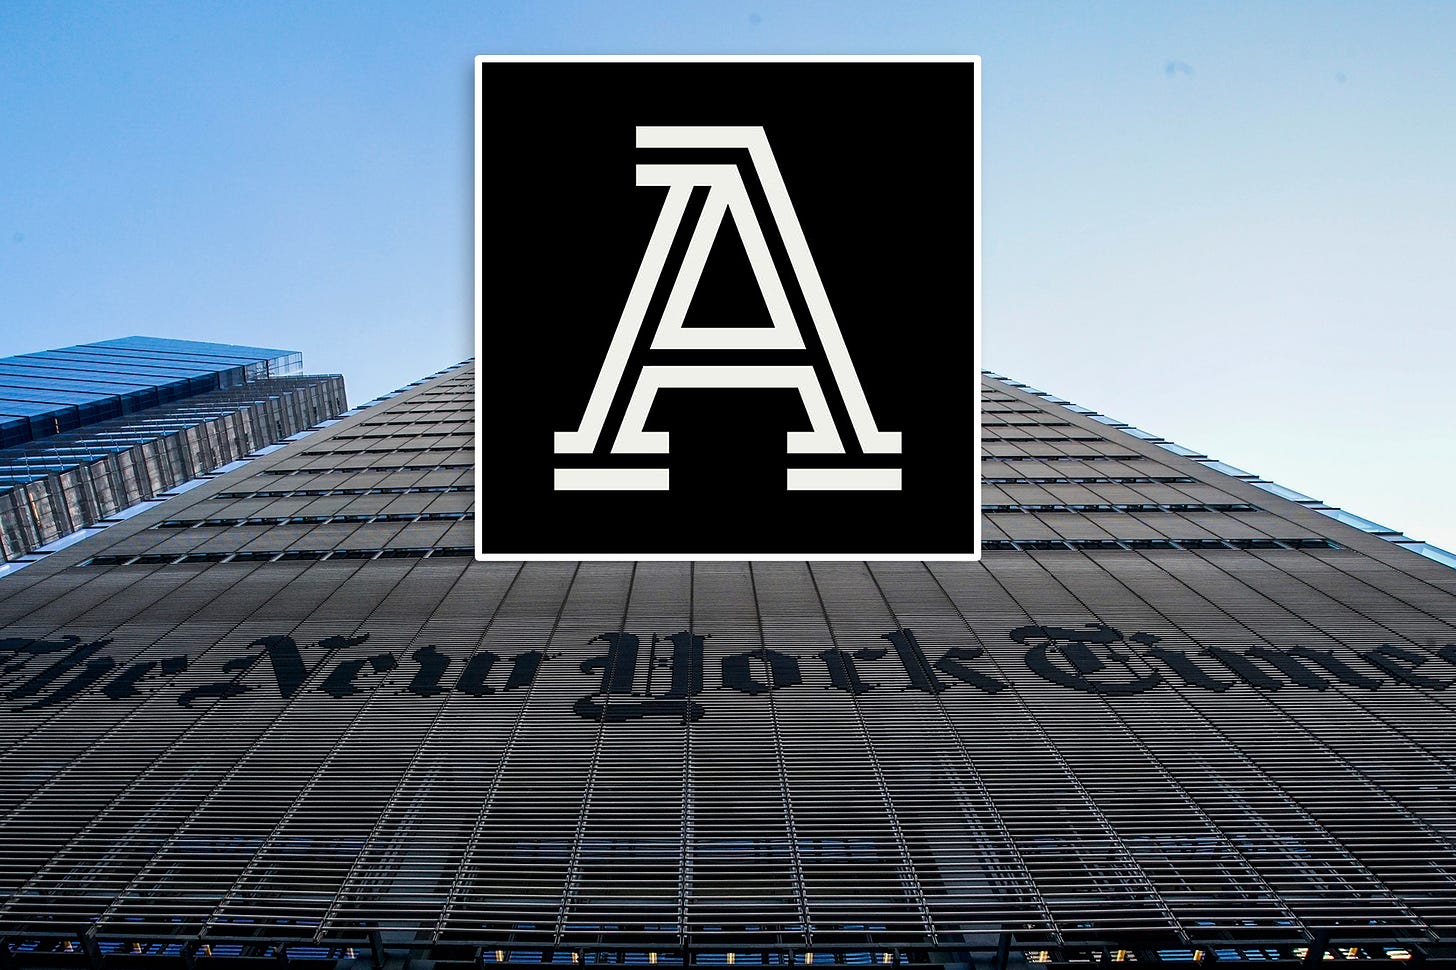 New York Times to buy sports website The Athletic for $550 million: report